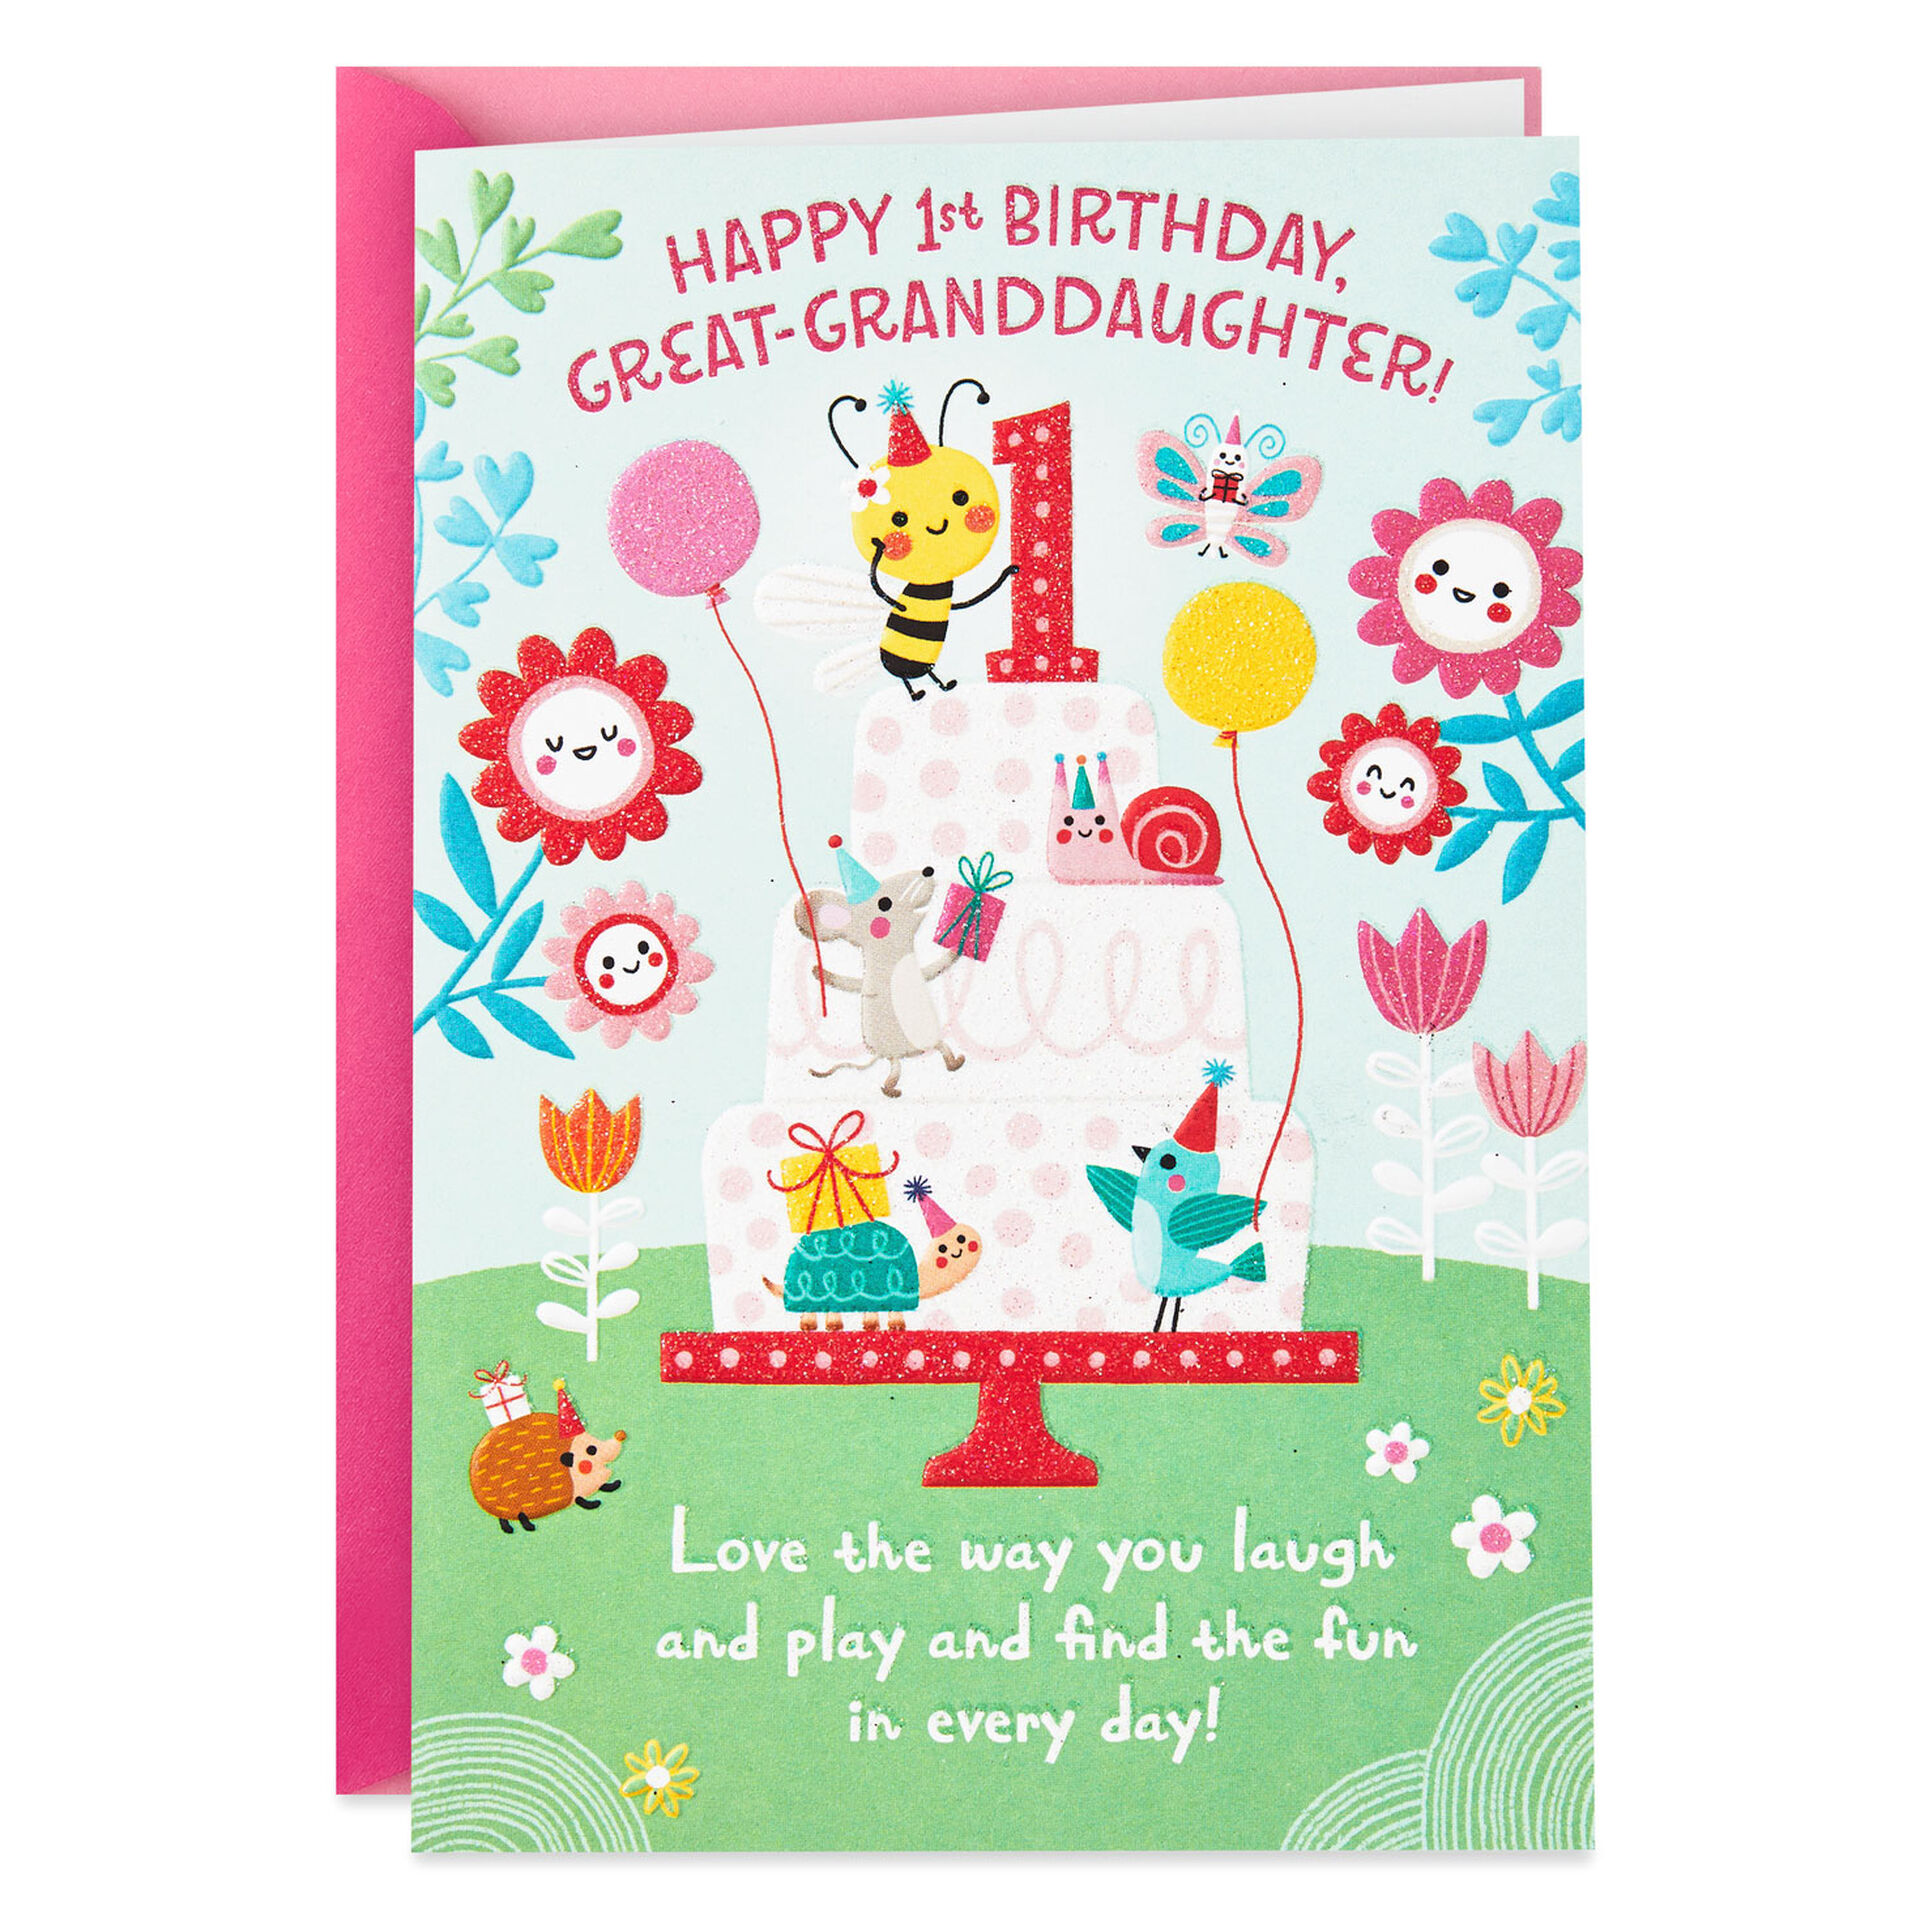 Bee-and-Cake-GreatGranddaughter-1st-Birthday-Card_299HKB6076_01